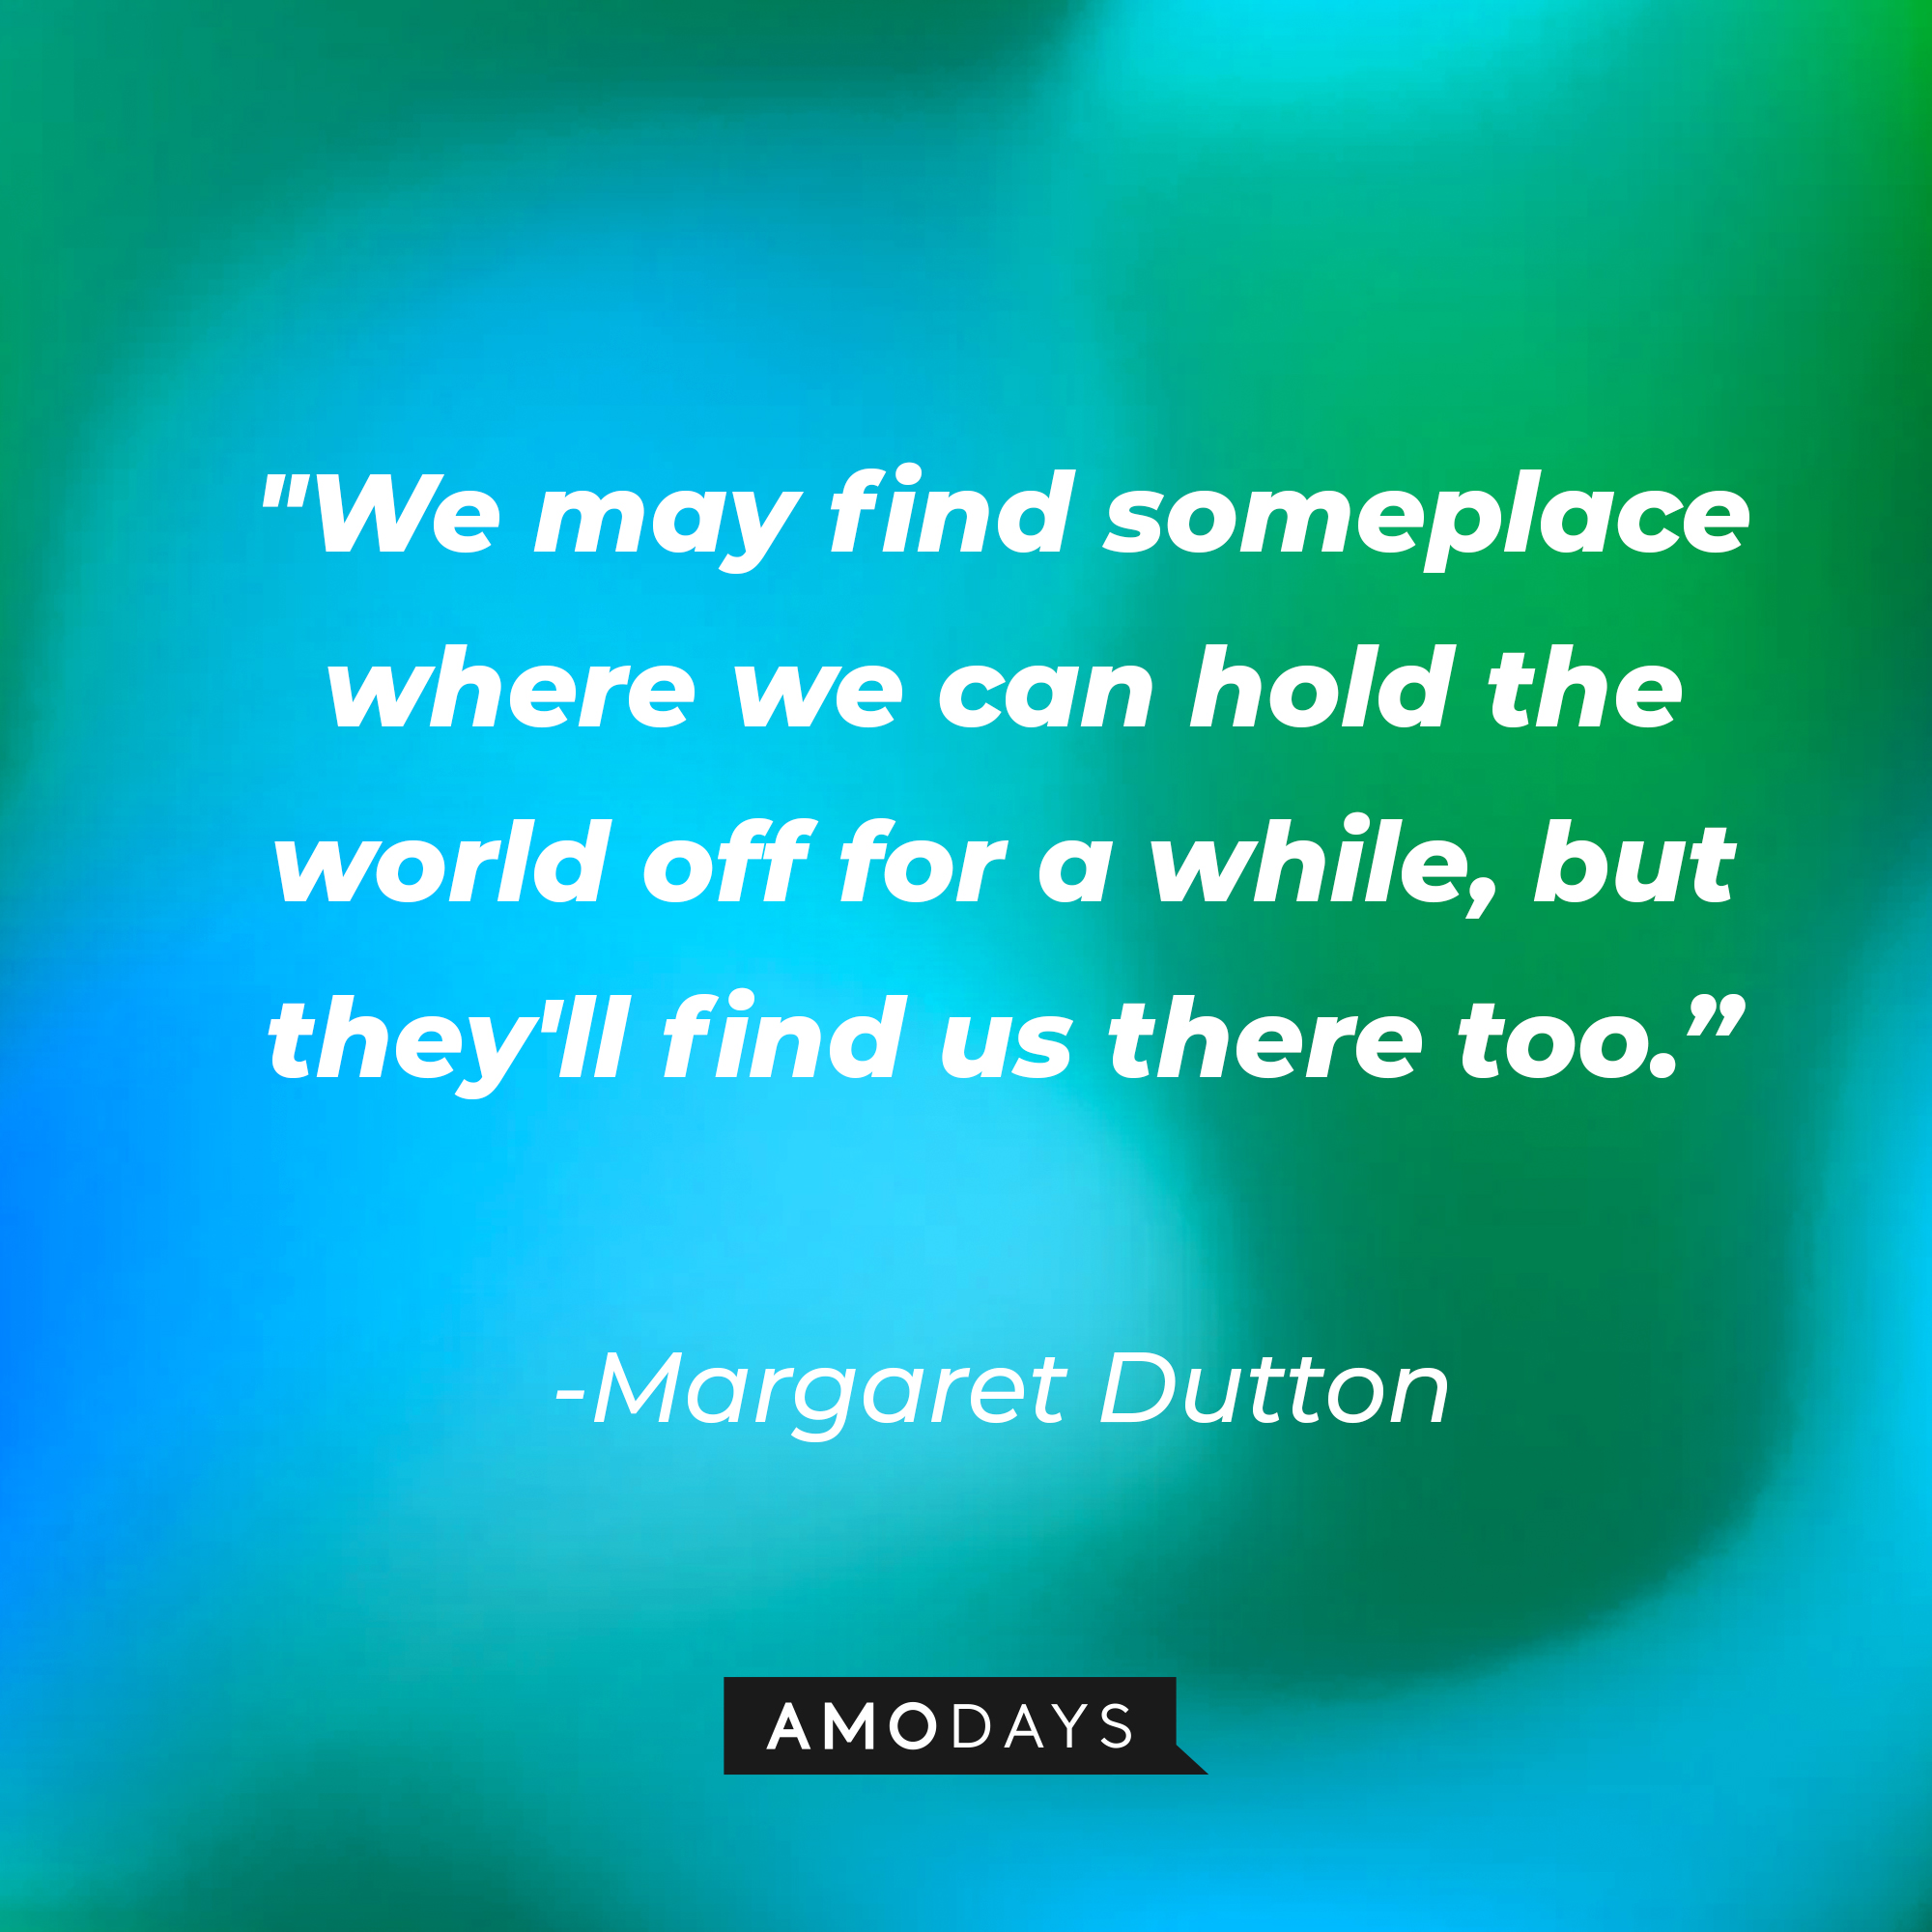 Margaret Dutton’s quote: "We may find someplace where we can hold the world off for a while, but they'll find us there too.” | Source: AmoDays